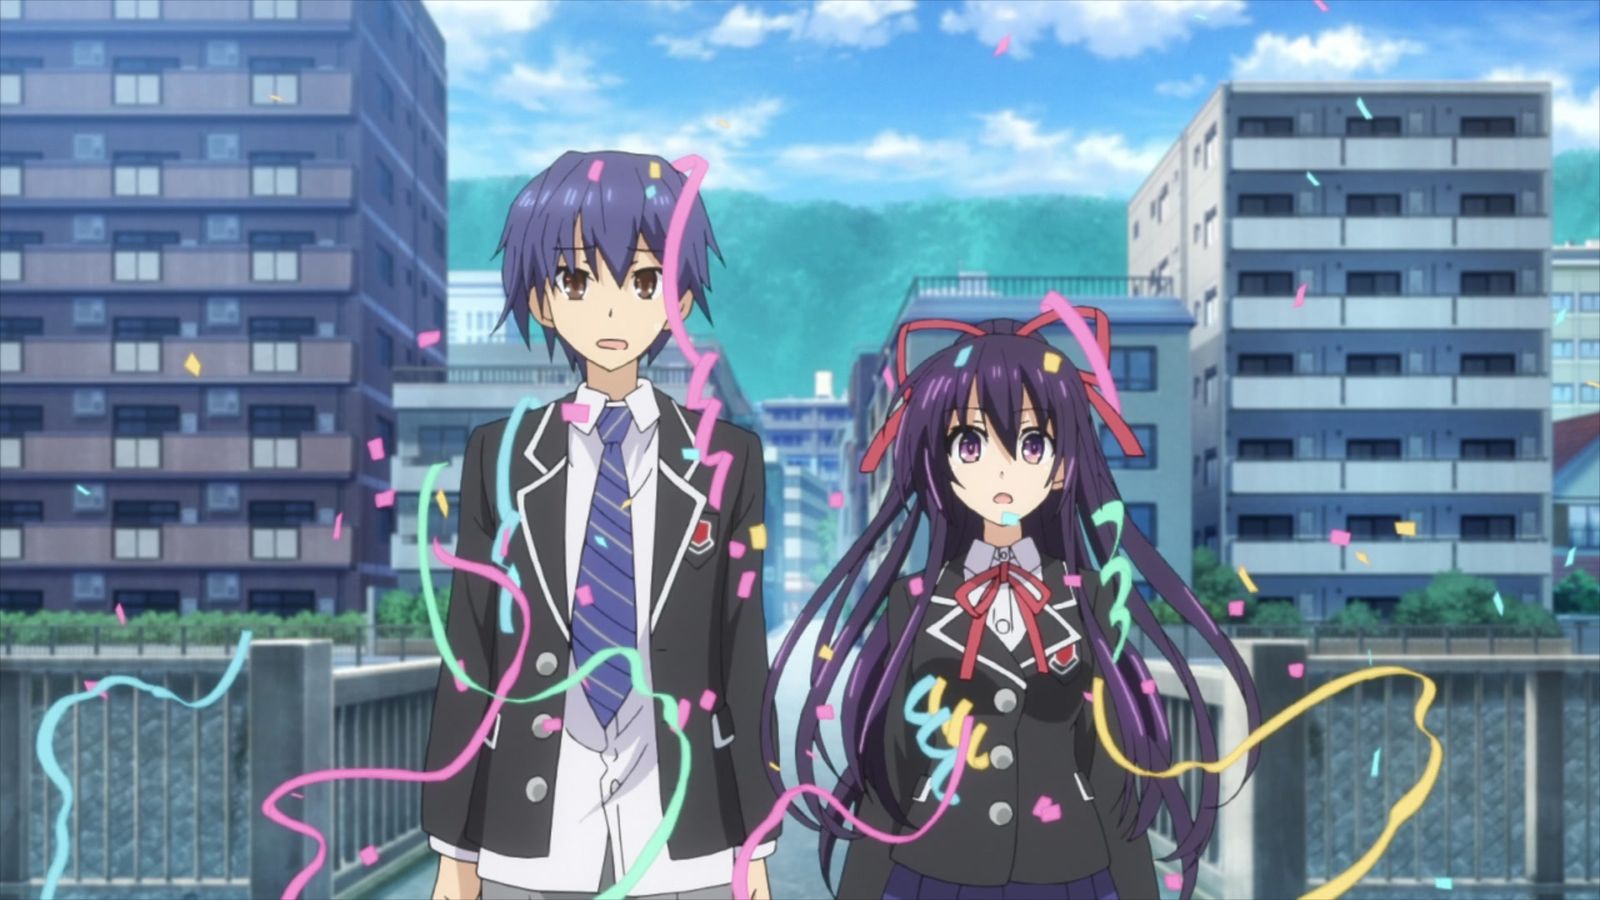 Do Tohka and Shido End Up Together in Date A Live?: Shido and Tohka covered in confetti